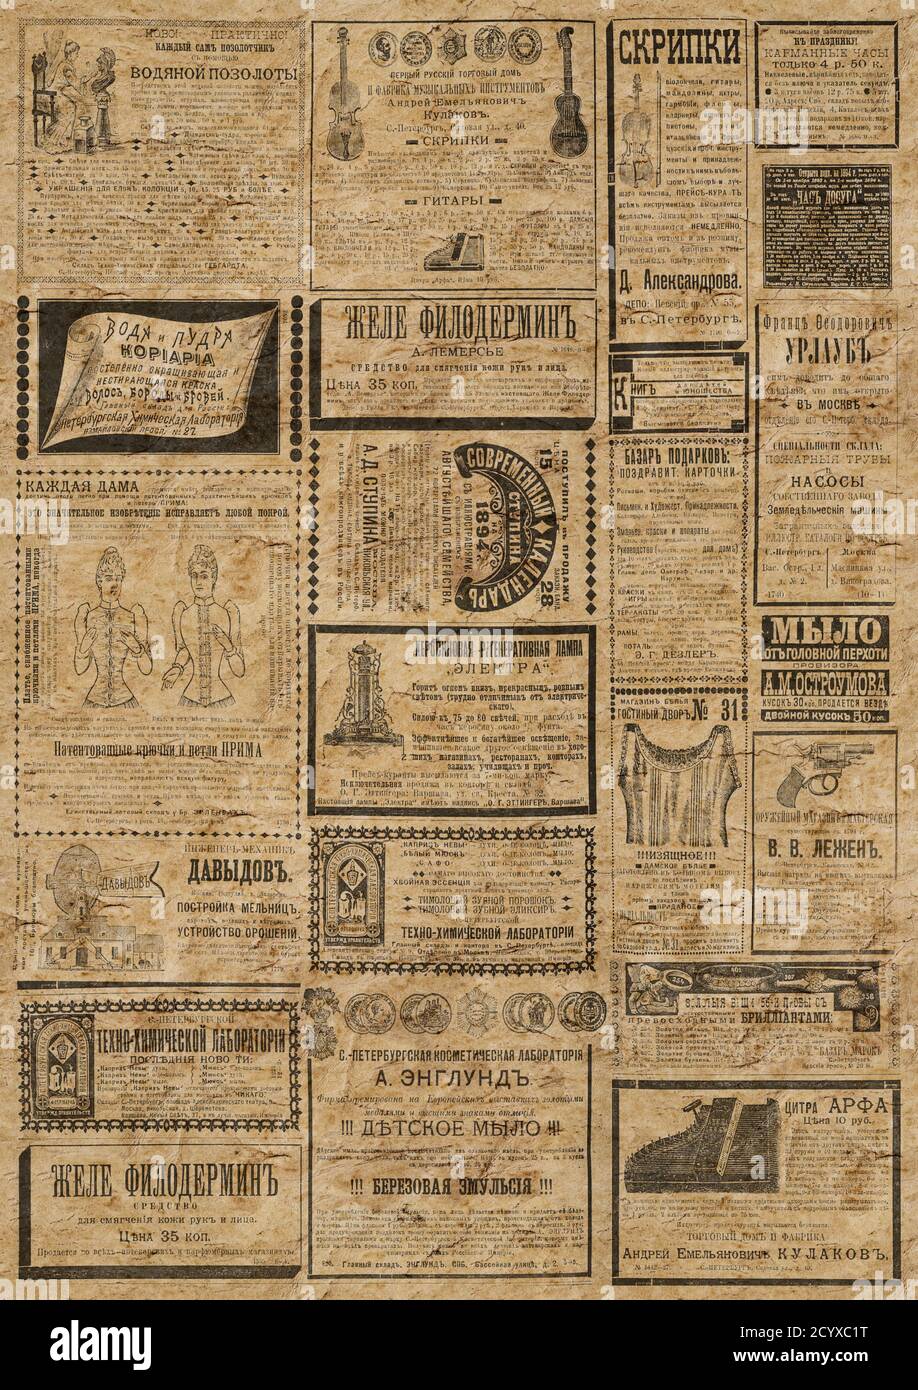 Vintage Newspaper Texture A Newspaper Vertical Background Illustration With Advertisements From A Vintage Old Russian Newspaper Of 13 Brown Old P Stock Photo Alamy